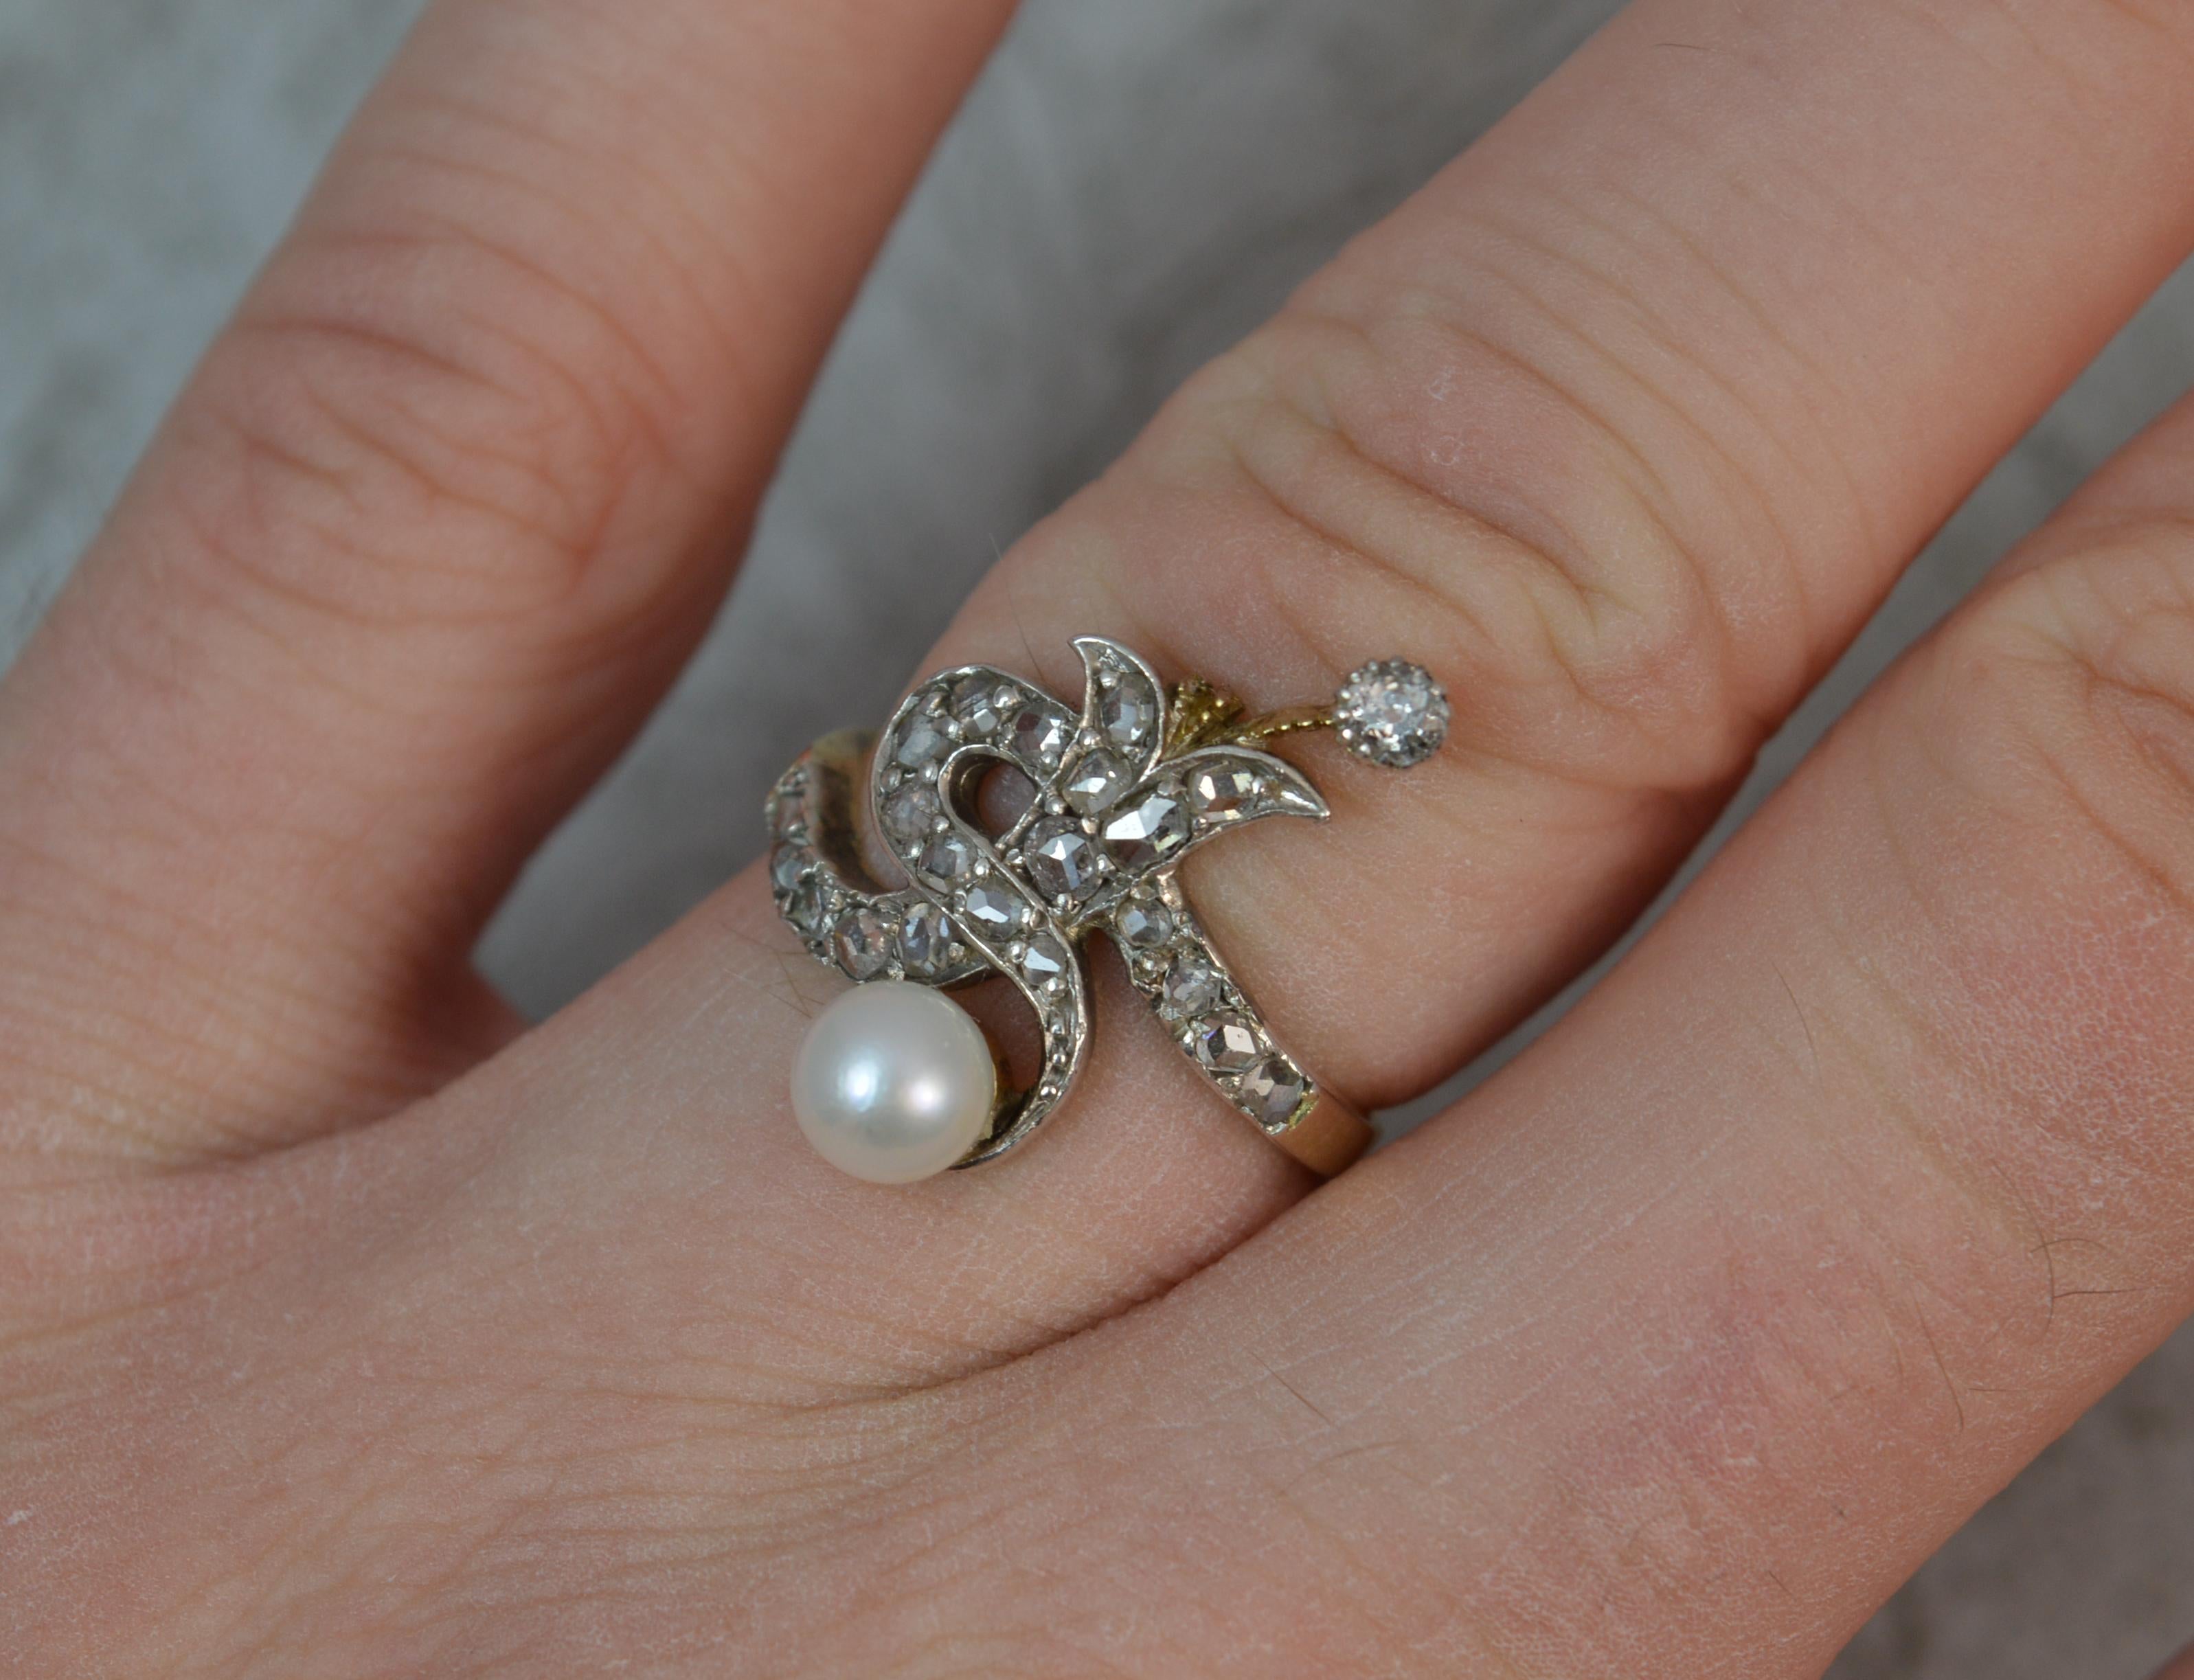 A stunning late Victorian period cluster ring.
Modelled in 18 carat yellow gold shank and platinum head setting.
Formed with many rose cut diamonds with old cut diamond and pearl top and bottom. Overall cluster resembles a serpent like